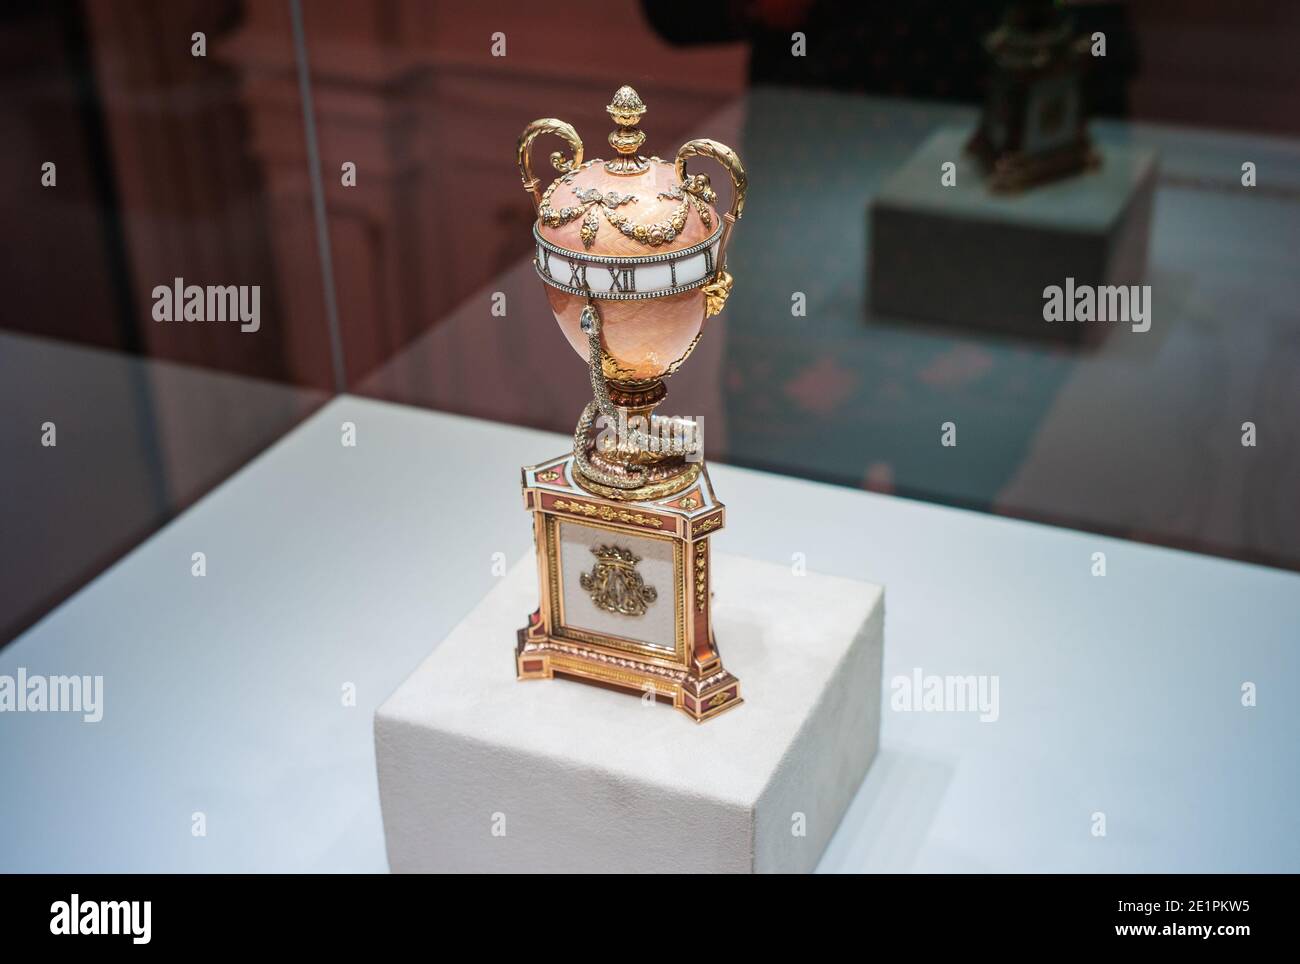 Saint Petersburg, Russia - ca. December 2017: Faberge Easter Egg with a Serpent called Duchess of Marlborough Egg at the Faberge Museum in the Shuvalo Stock Photo